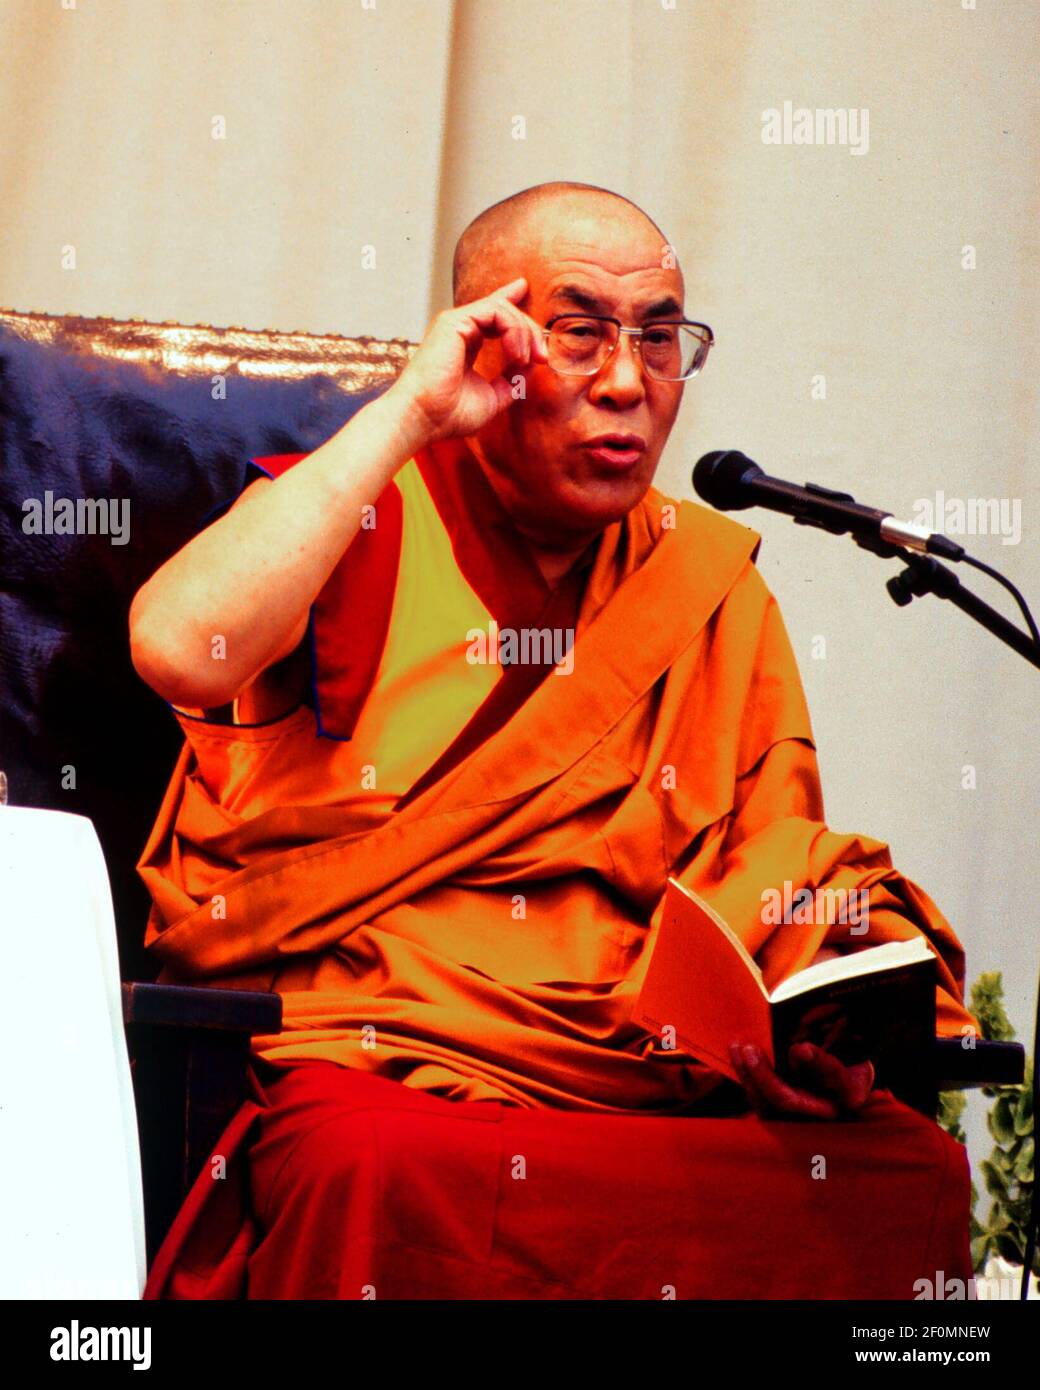 The Dalai Lama gives free lecture in New York City's Central Park East  Meadow on August 15, 1999. The Dalai Lama is the spiritual leader of the  Tibetan Buddhists and is in